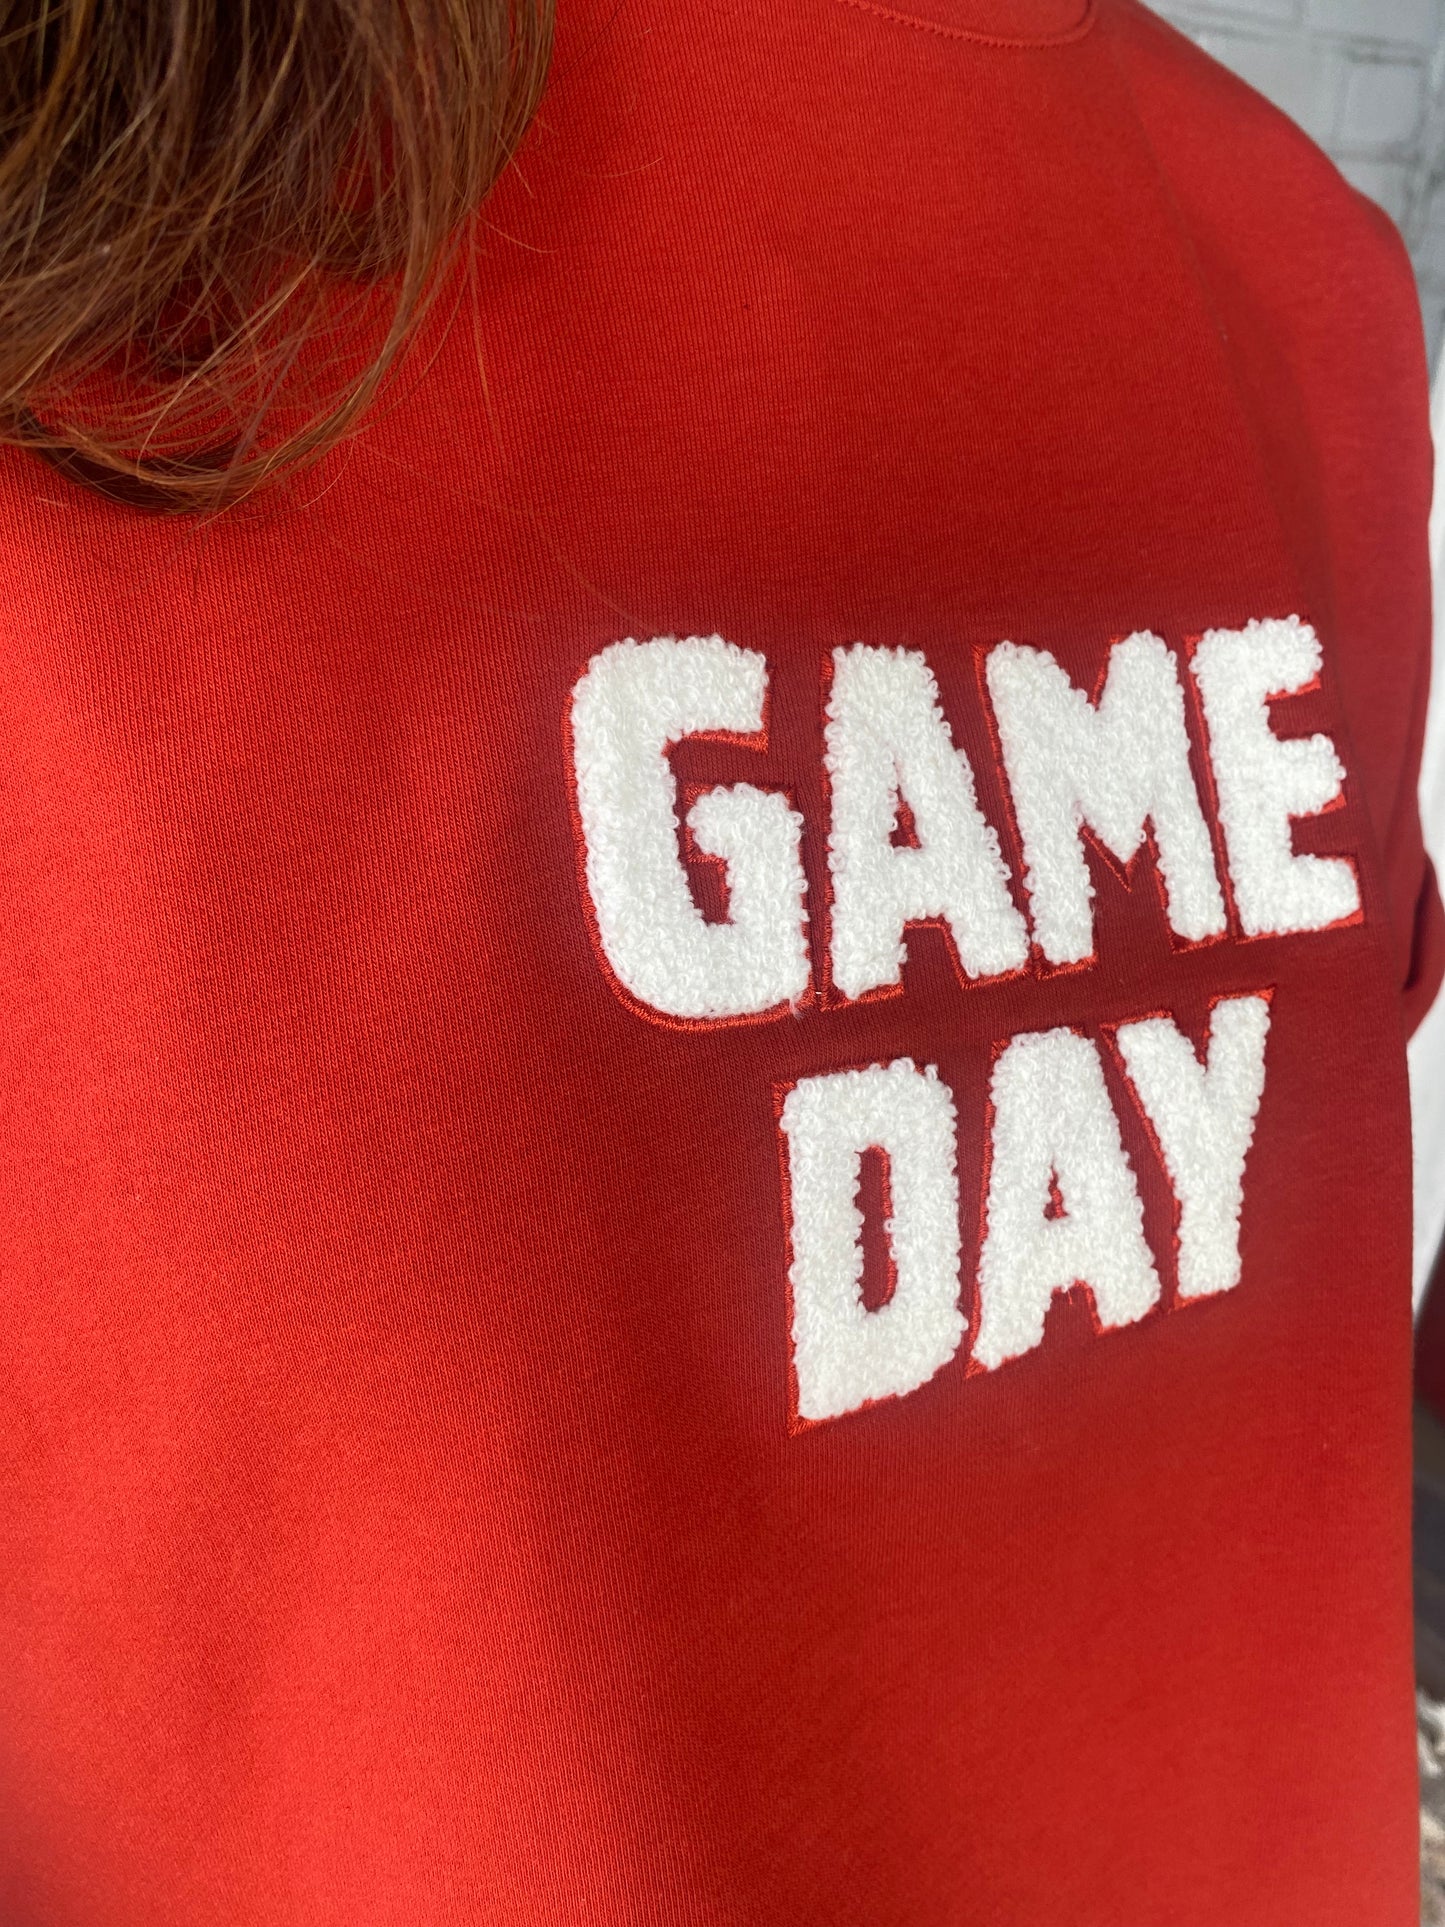 Game Day Red T-Shirt